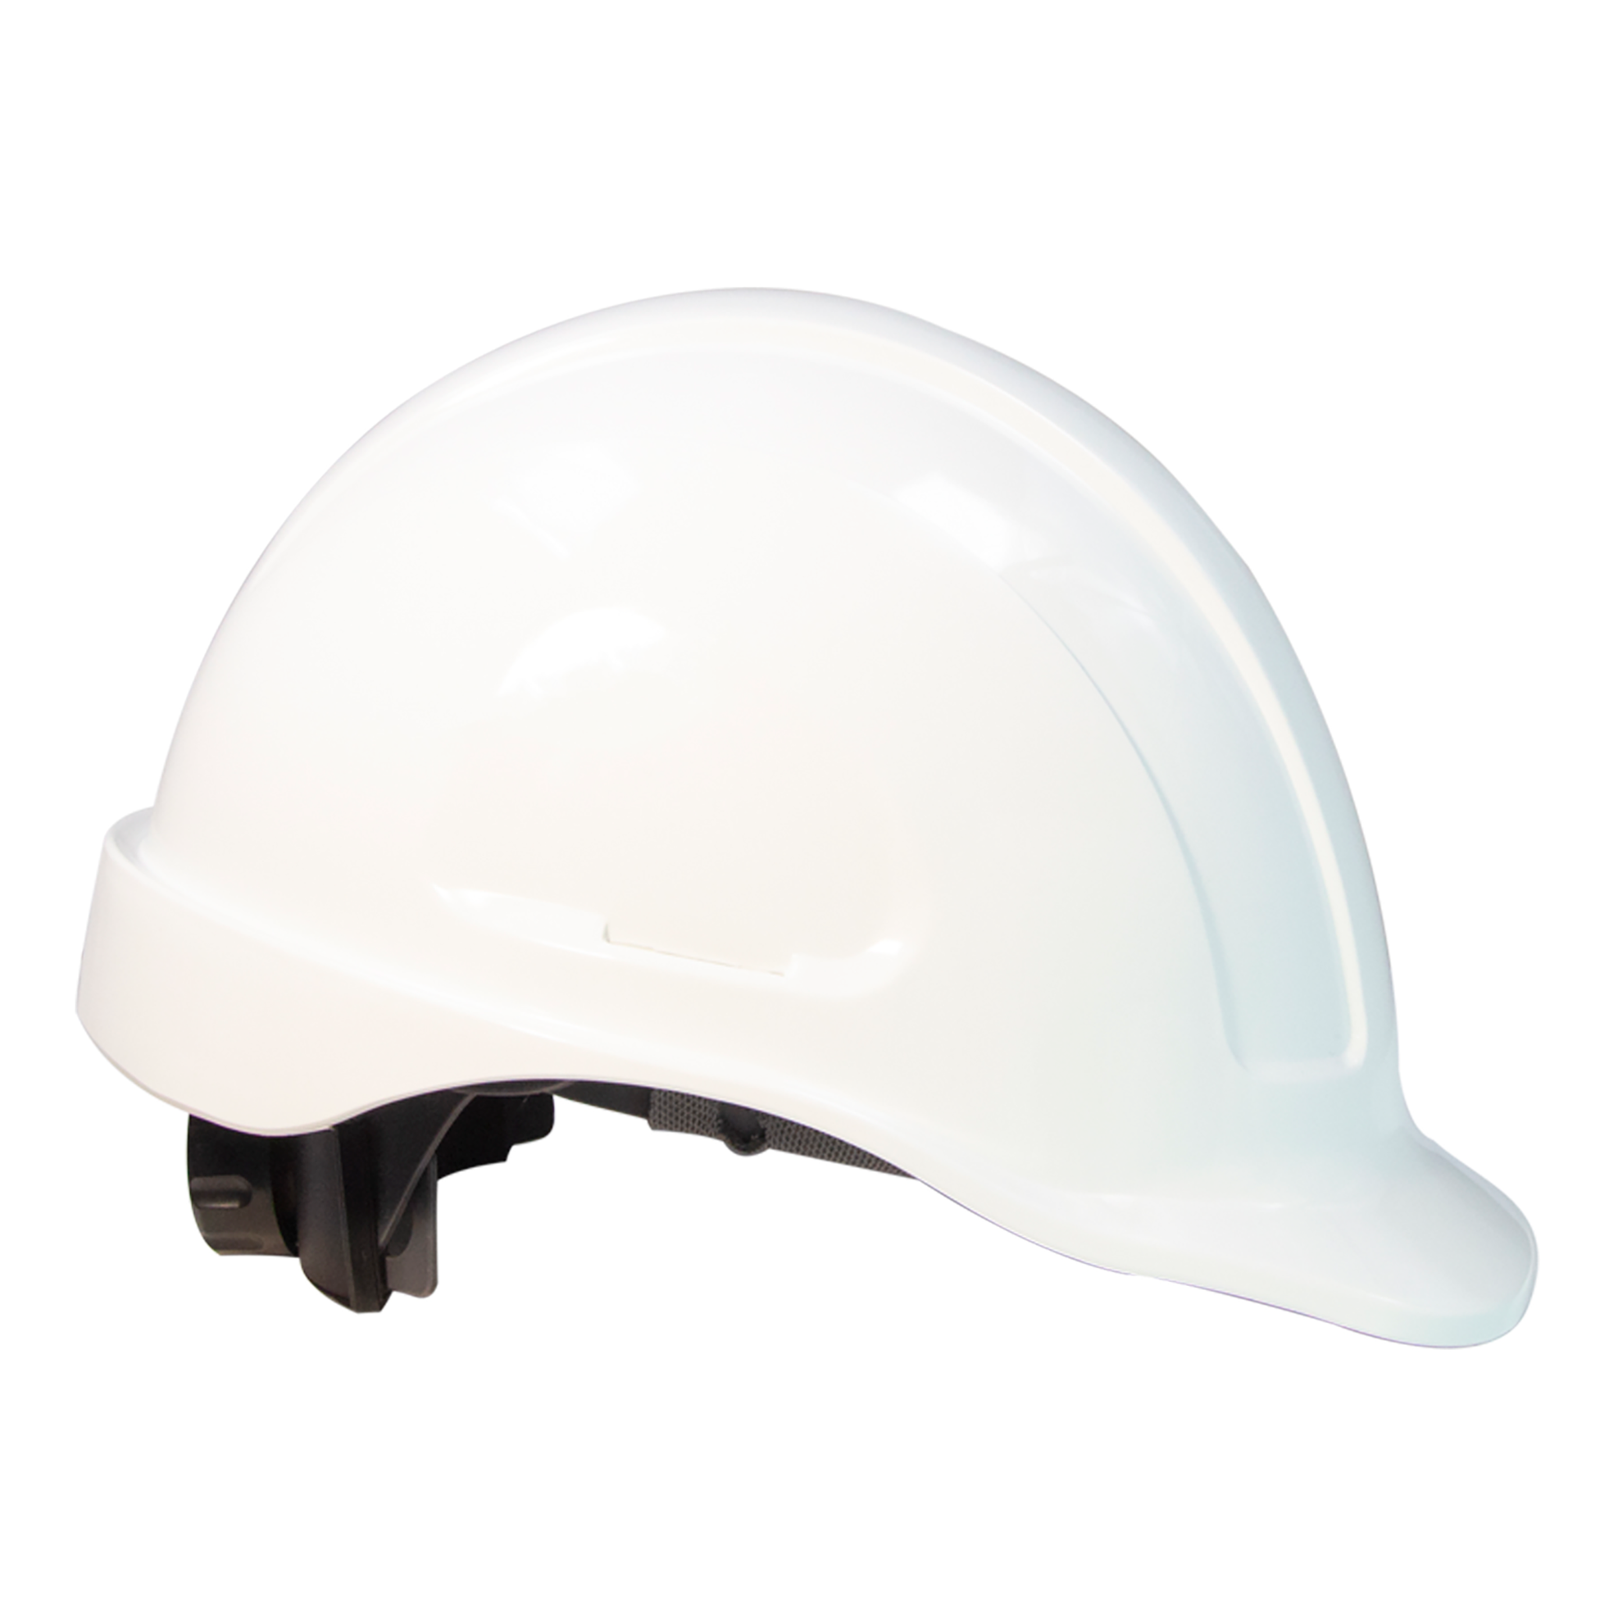 White hard hat with slots compatible with JORESTECH Earmuffs